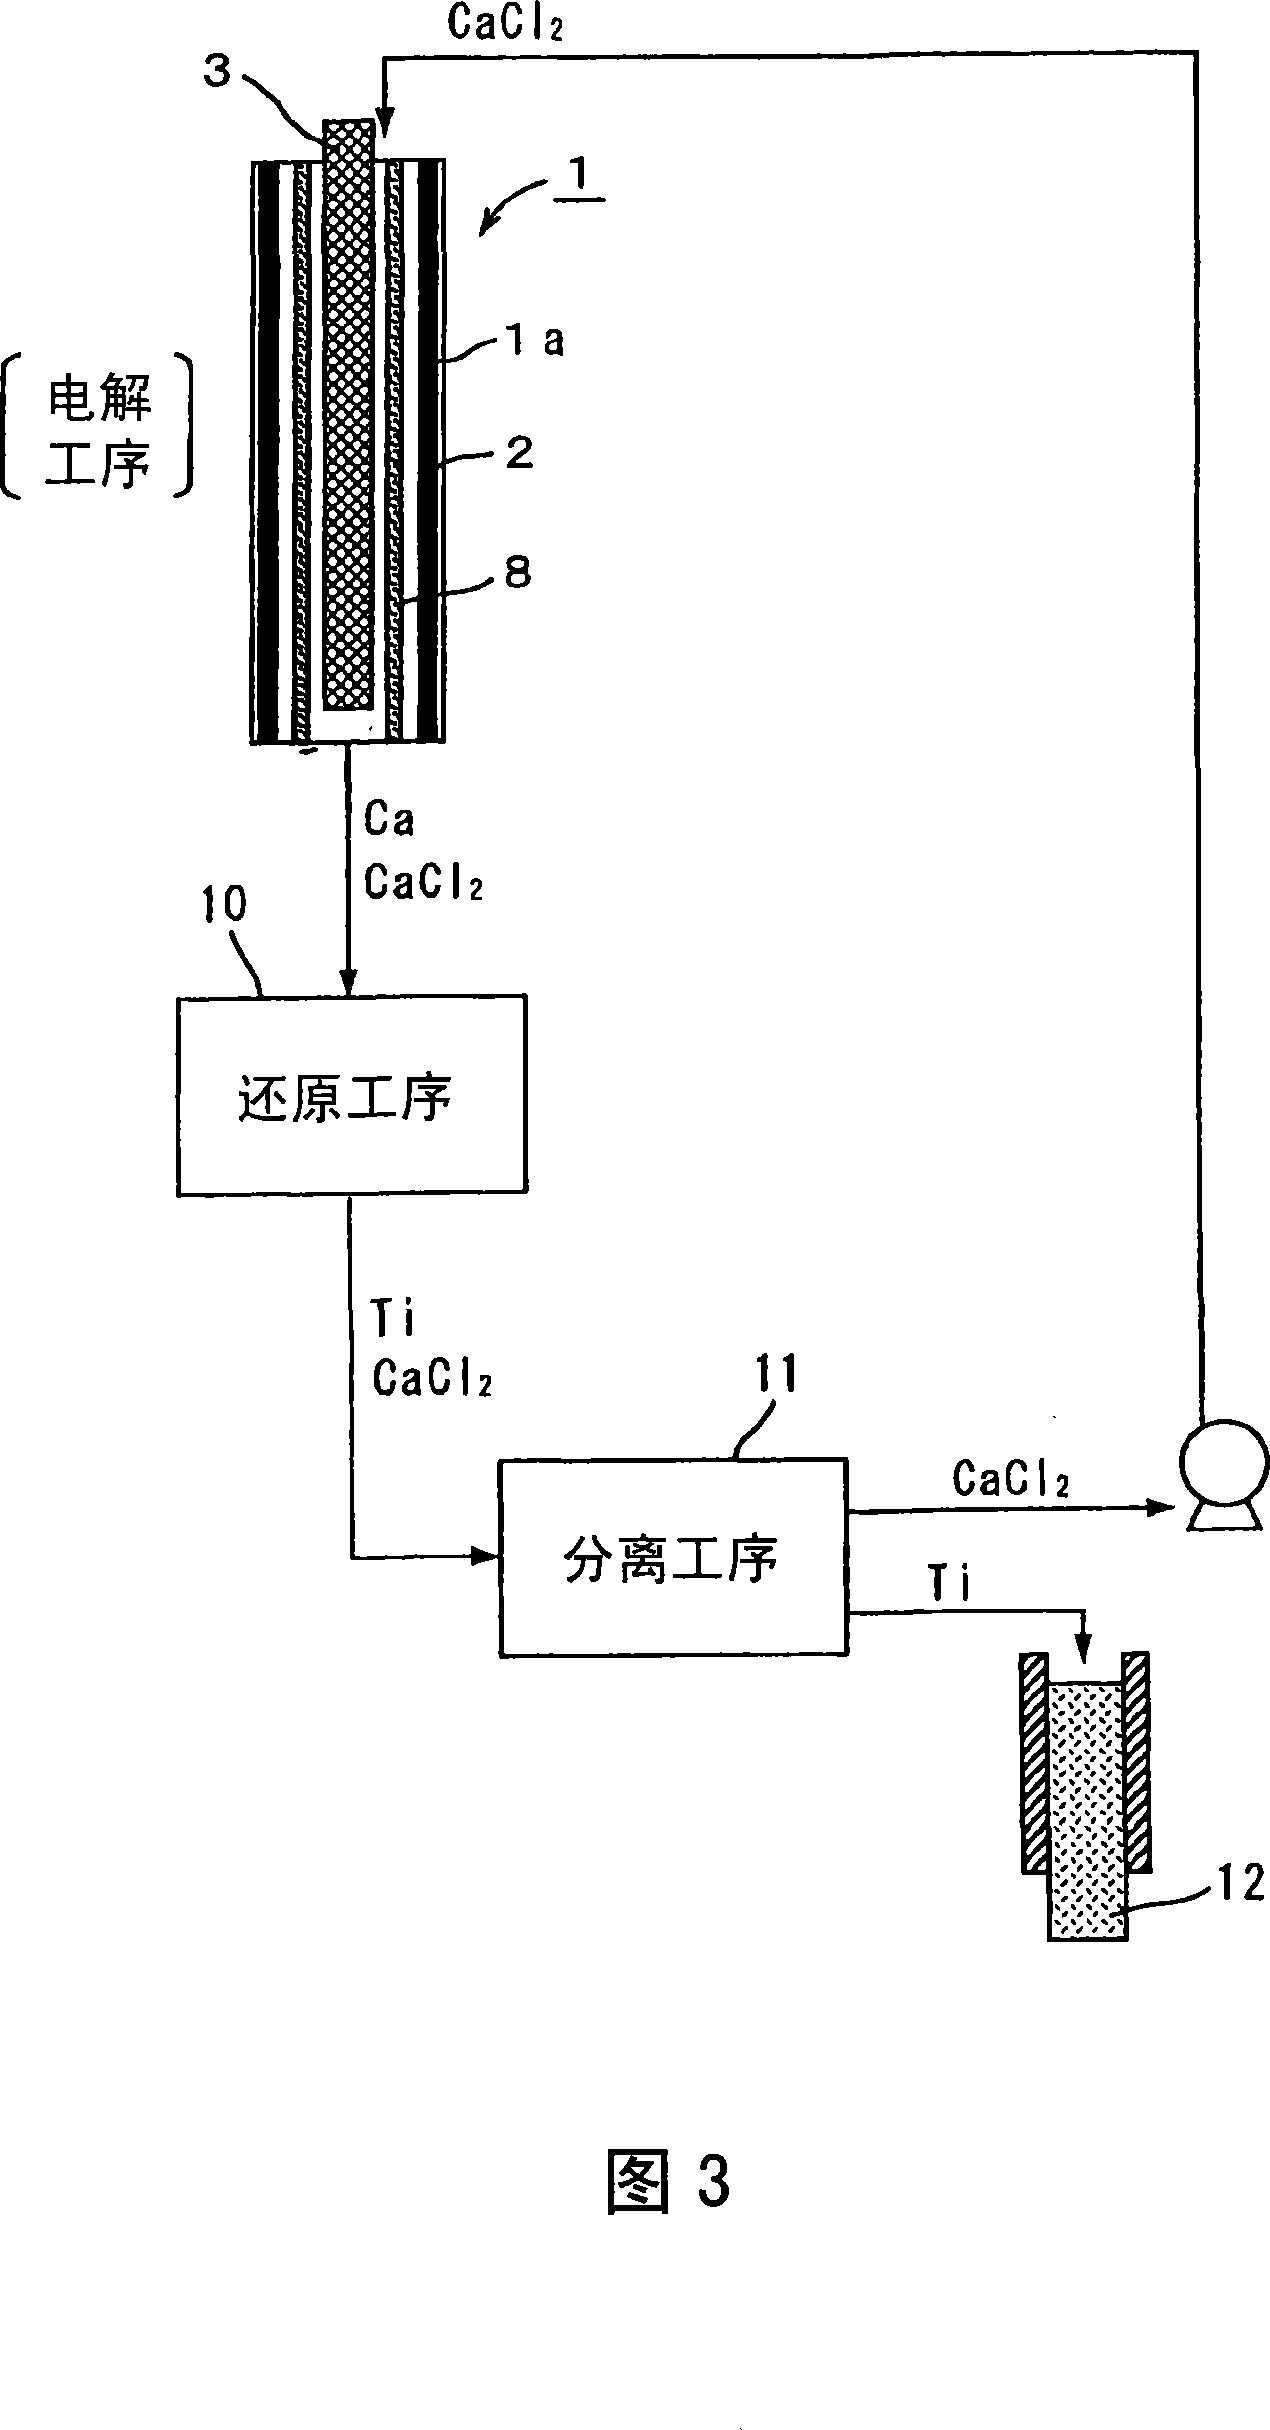 Method for electrolysis of molten salt, electrolytic cell, and process for producing ti using said method